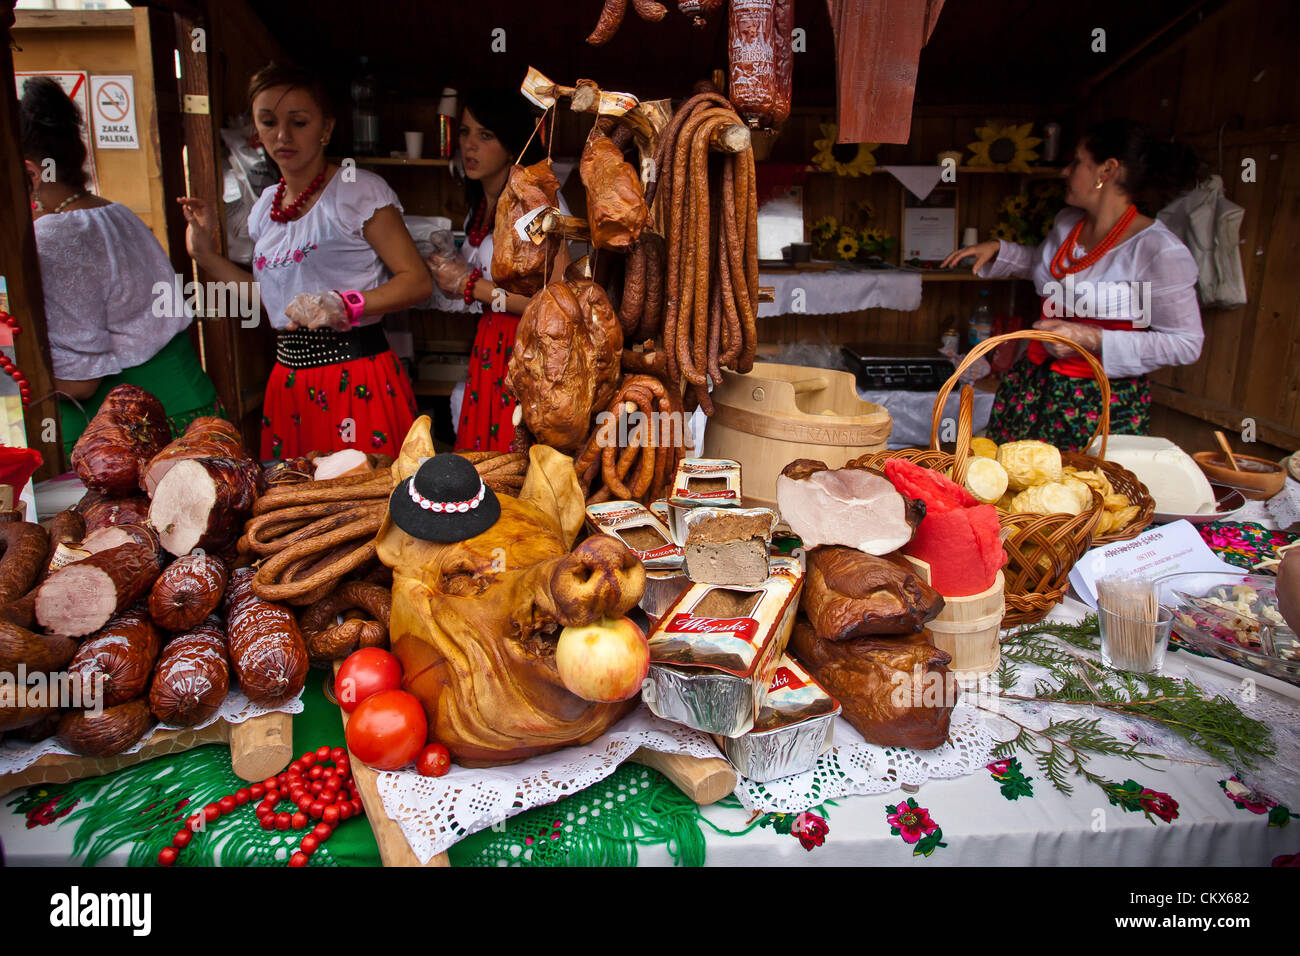 August 26, 2012 Cracow, Poland - Market stall with sausages and meats during annual traditional Polish food festival. Shown sausage (pol. - kiełbasa) is a food usually made from ground meat with a skin around it. Sausage making is a traditional food preservation technique. Sausages may be preserved by curing, drying, or smoking. Stock Photo